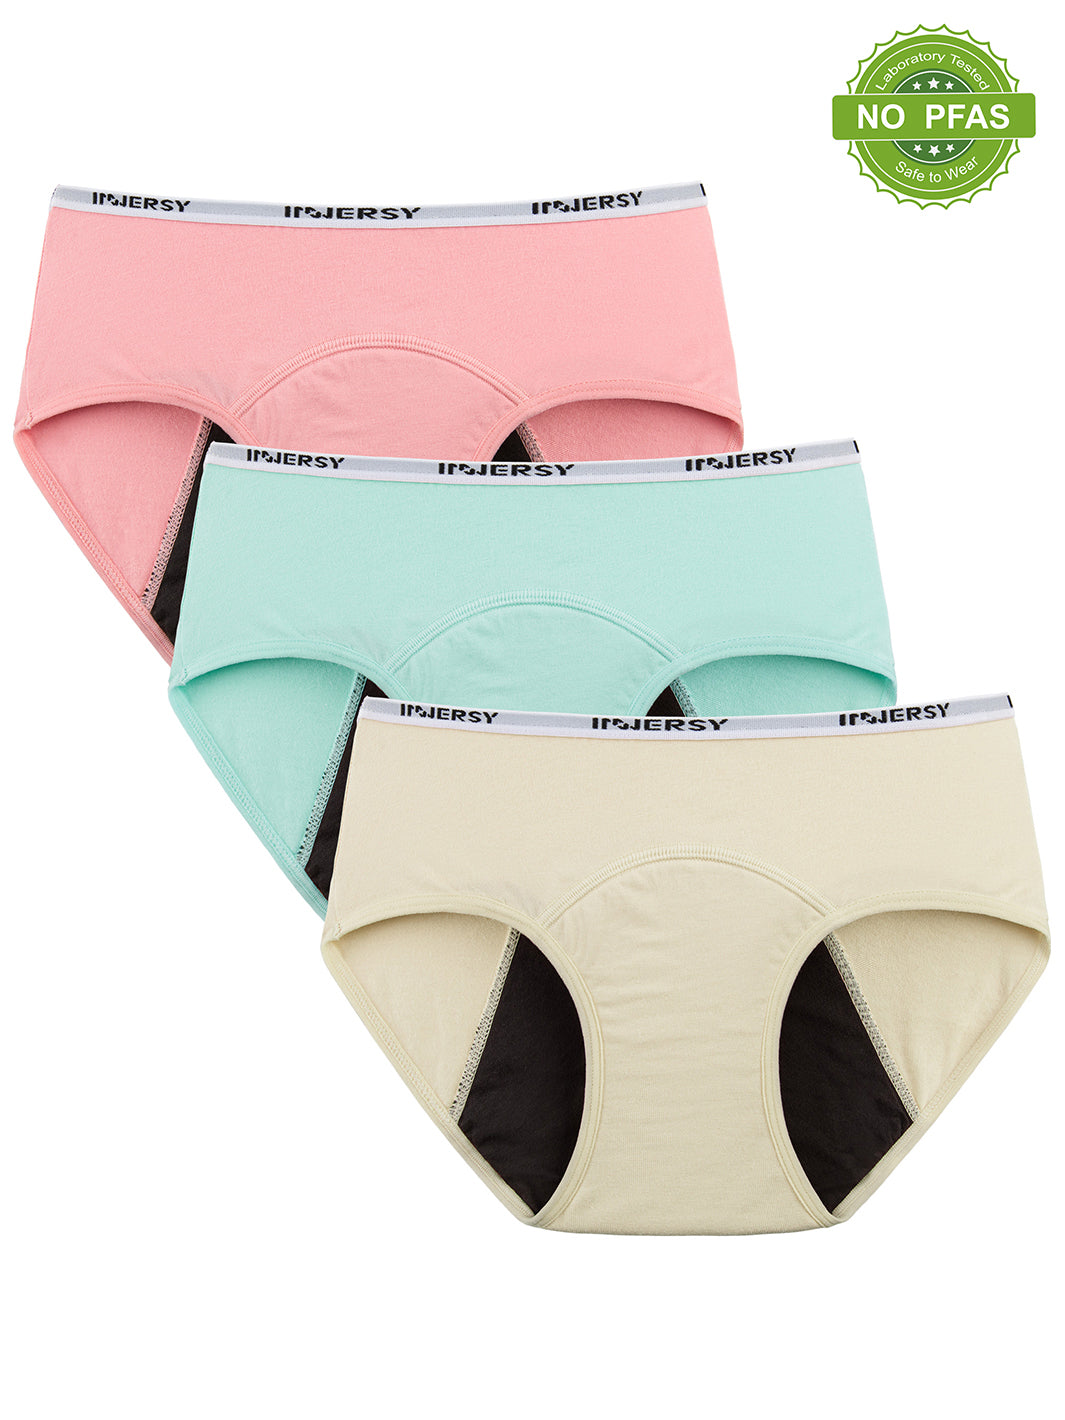 INNERSY Big Girls' Underwear Cotton Full Briefs Contrasting Color Panties  for Teens 6 Pack (S(8-10 yrs), Basics) 